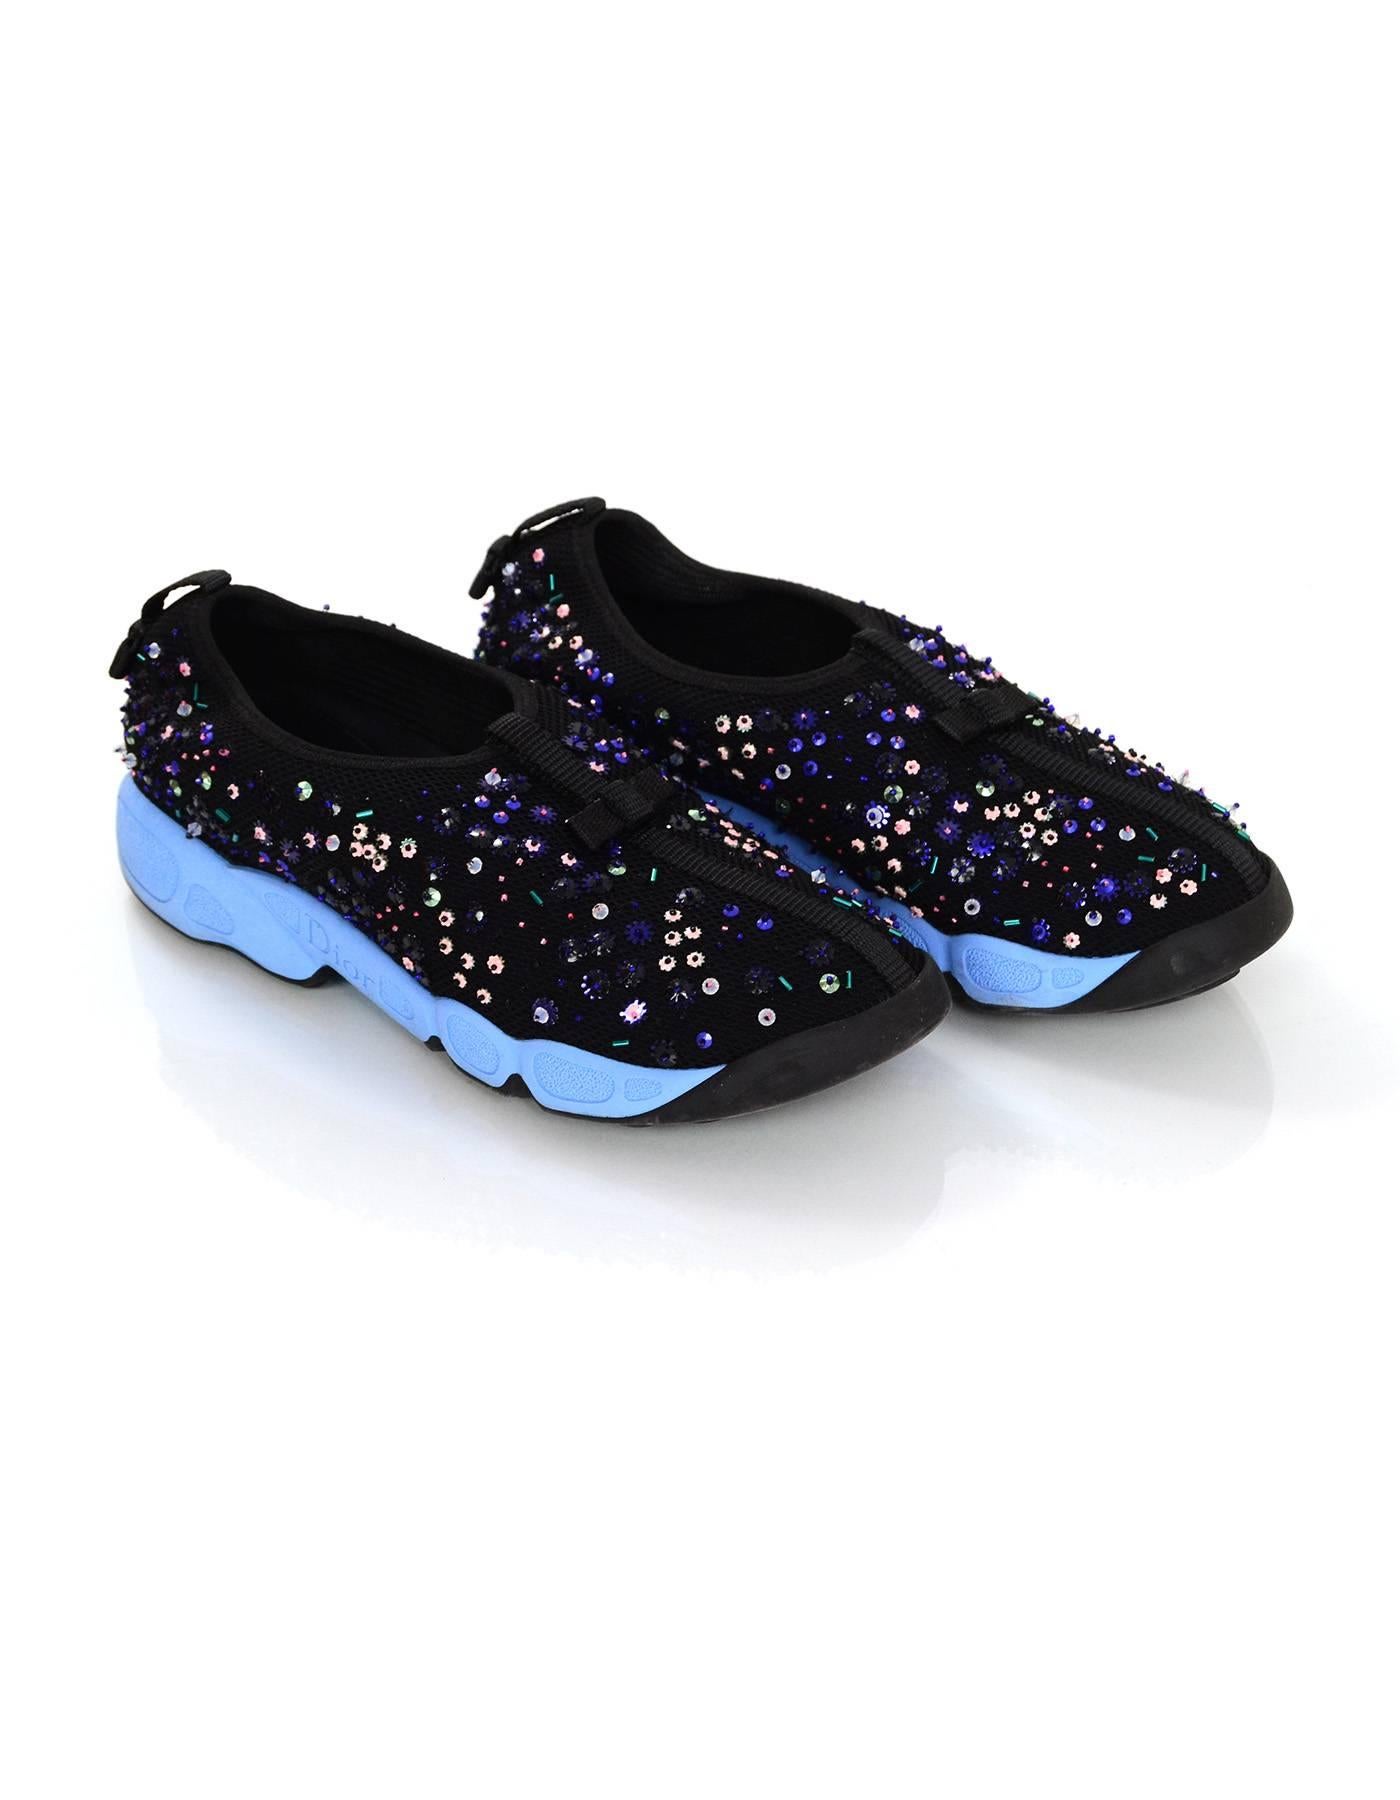 Christian Dior Black and Blue Beaded Fusion Sneakers Sz 38.5 1